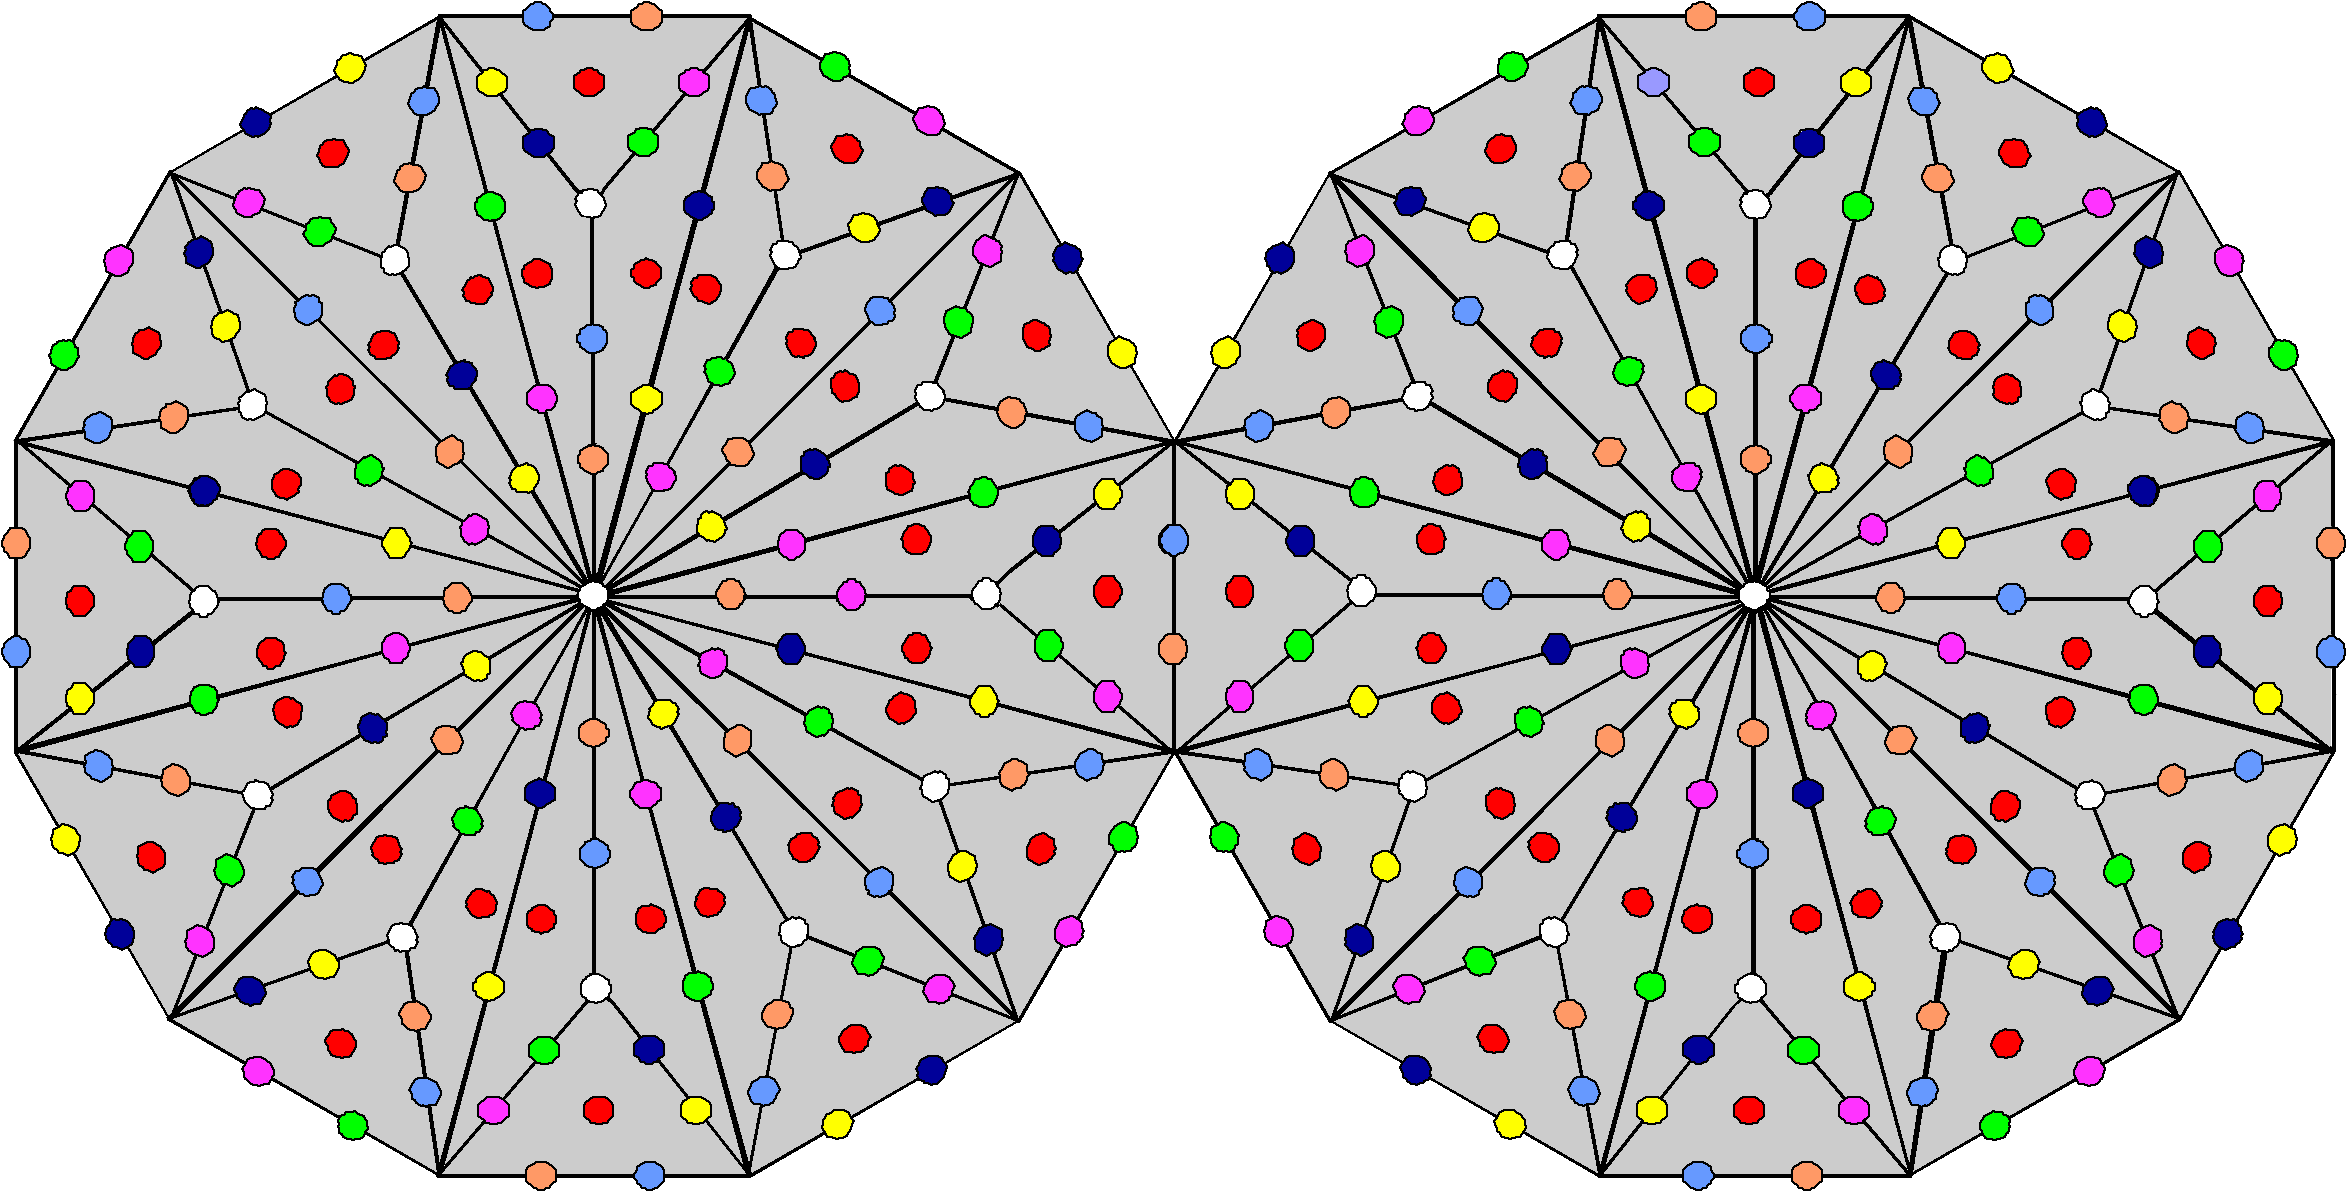 336 yods in two joined Type B dodecagon other than corners